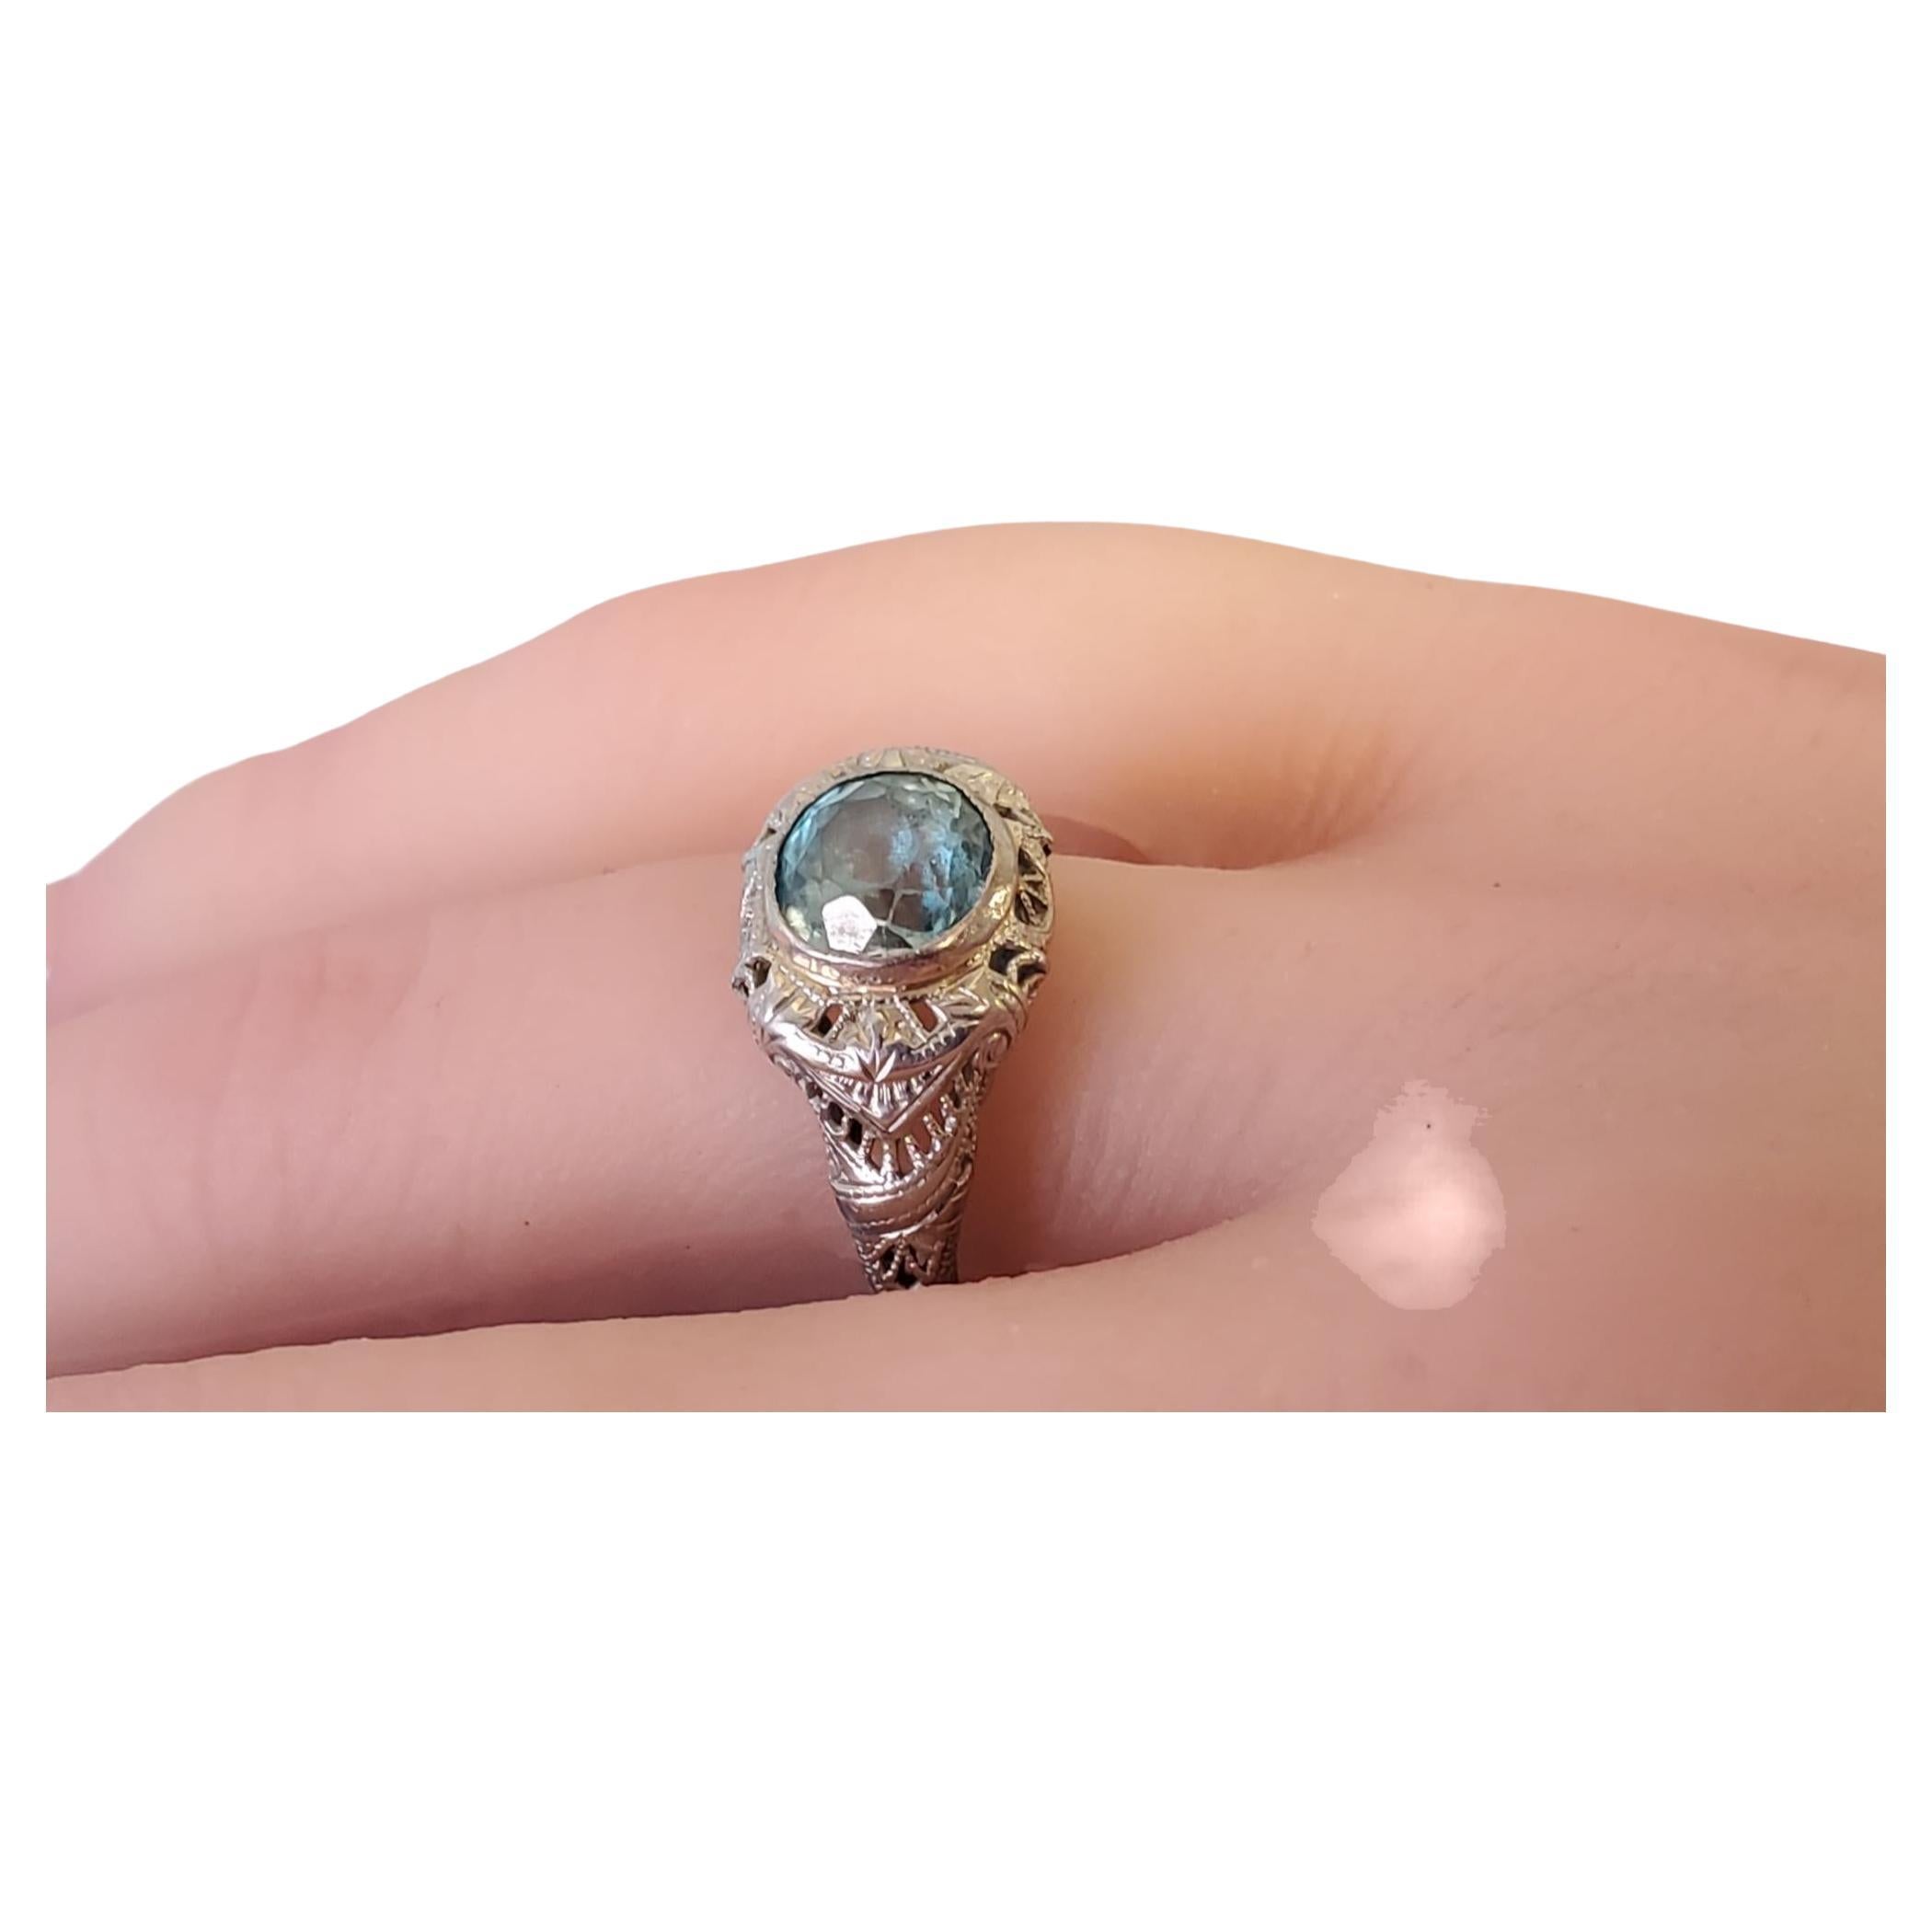 Antique Art Deco 18k white gold Filigree Ring with 7.5mm Blue Zircon For Sale